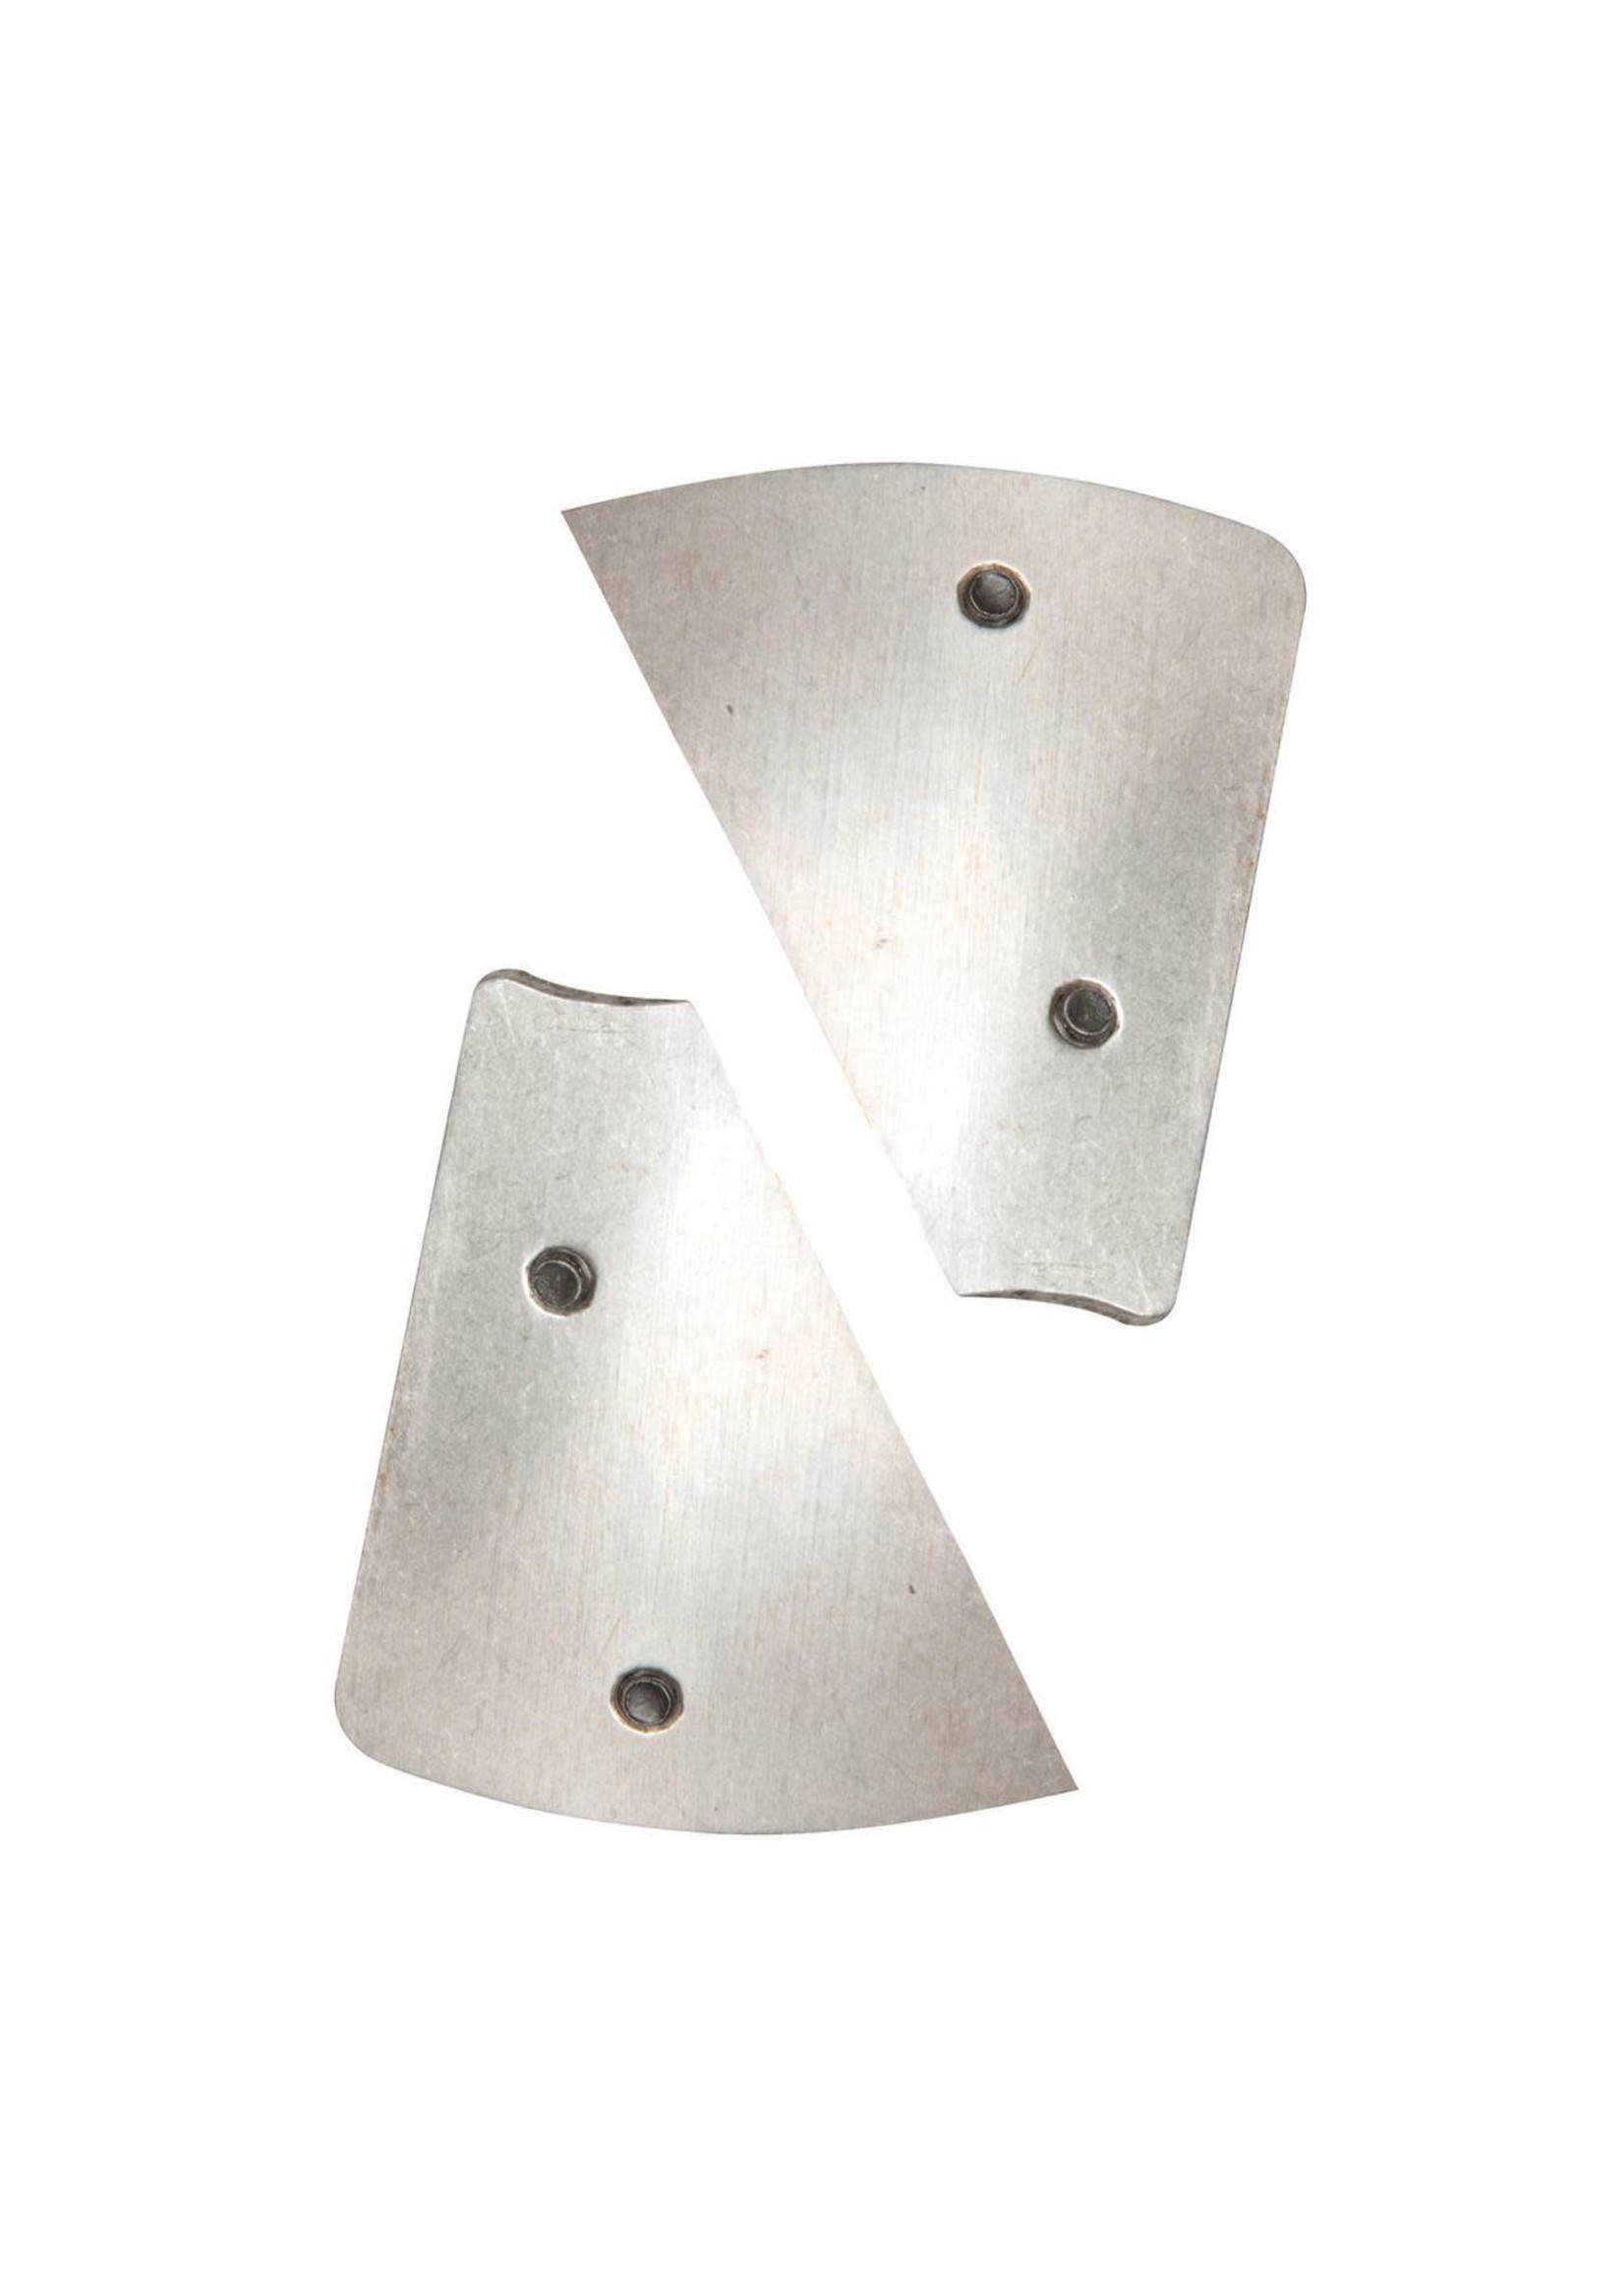 FRABILL INC. FRABILL REPLACEMENT BLADE 5" CURVED 9021